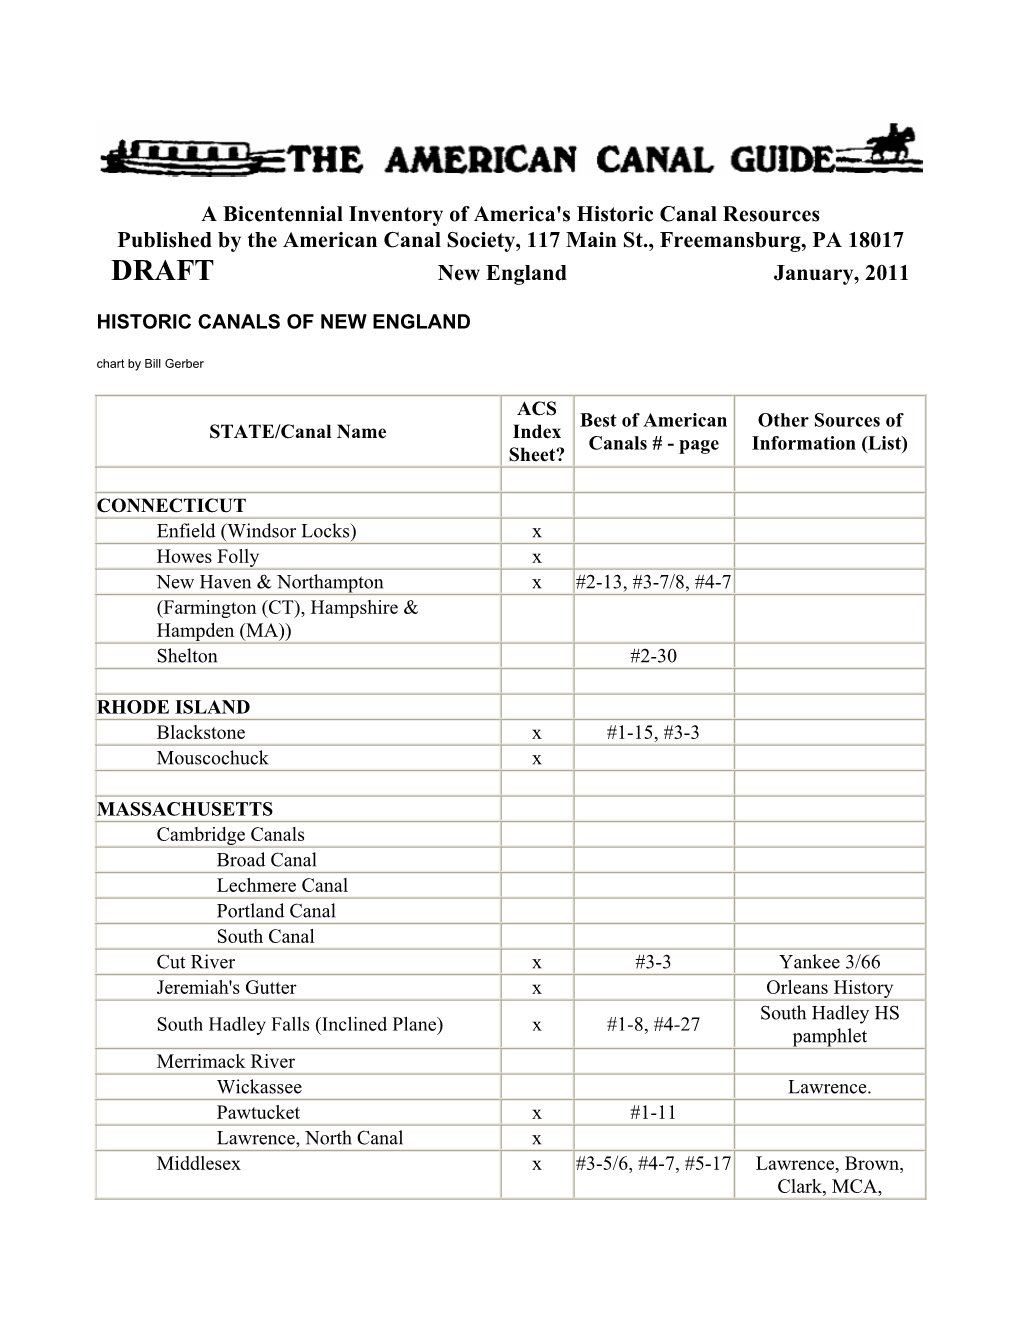 A Bicentennial Inventory of America's Historic Canal Resources